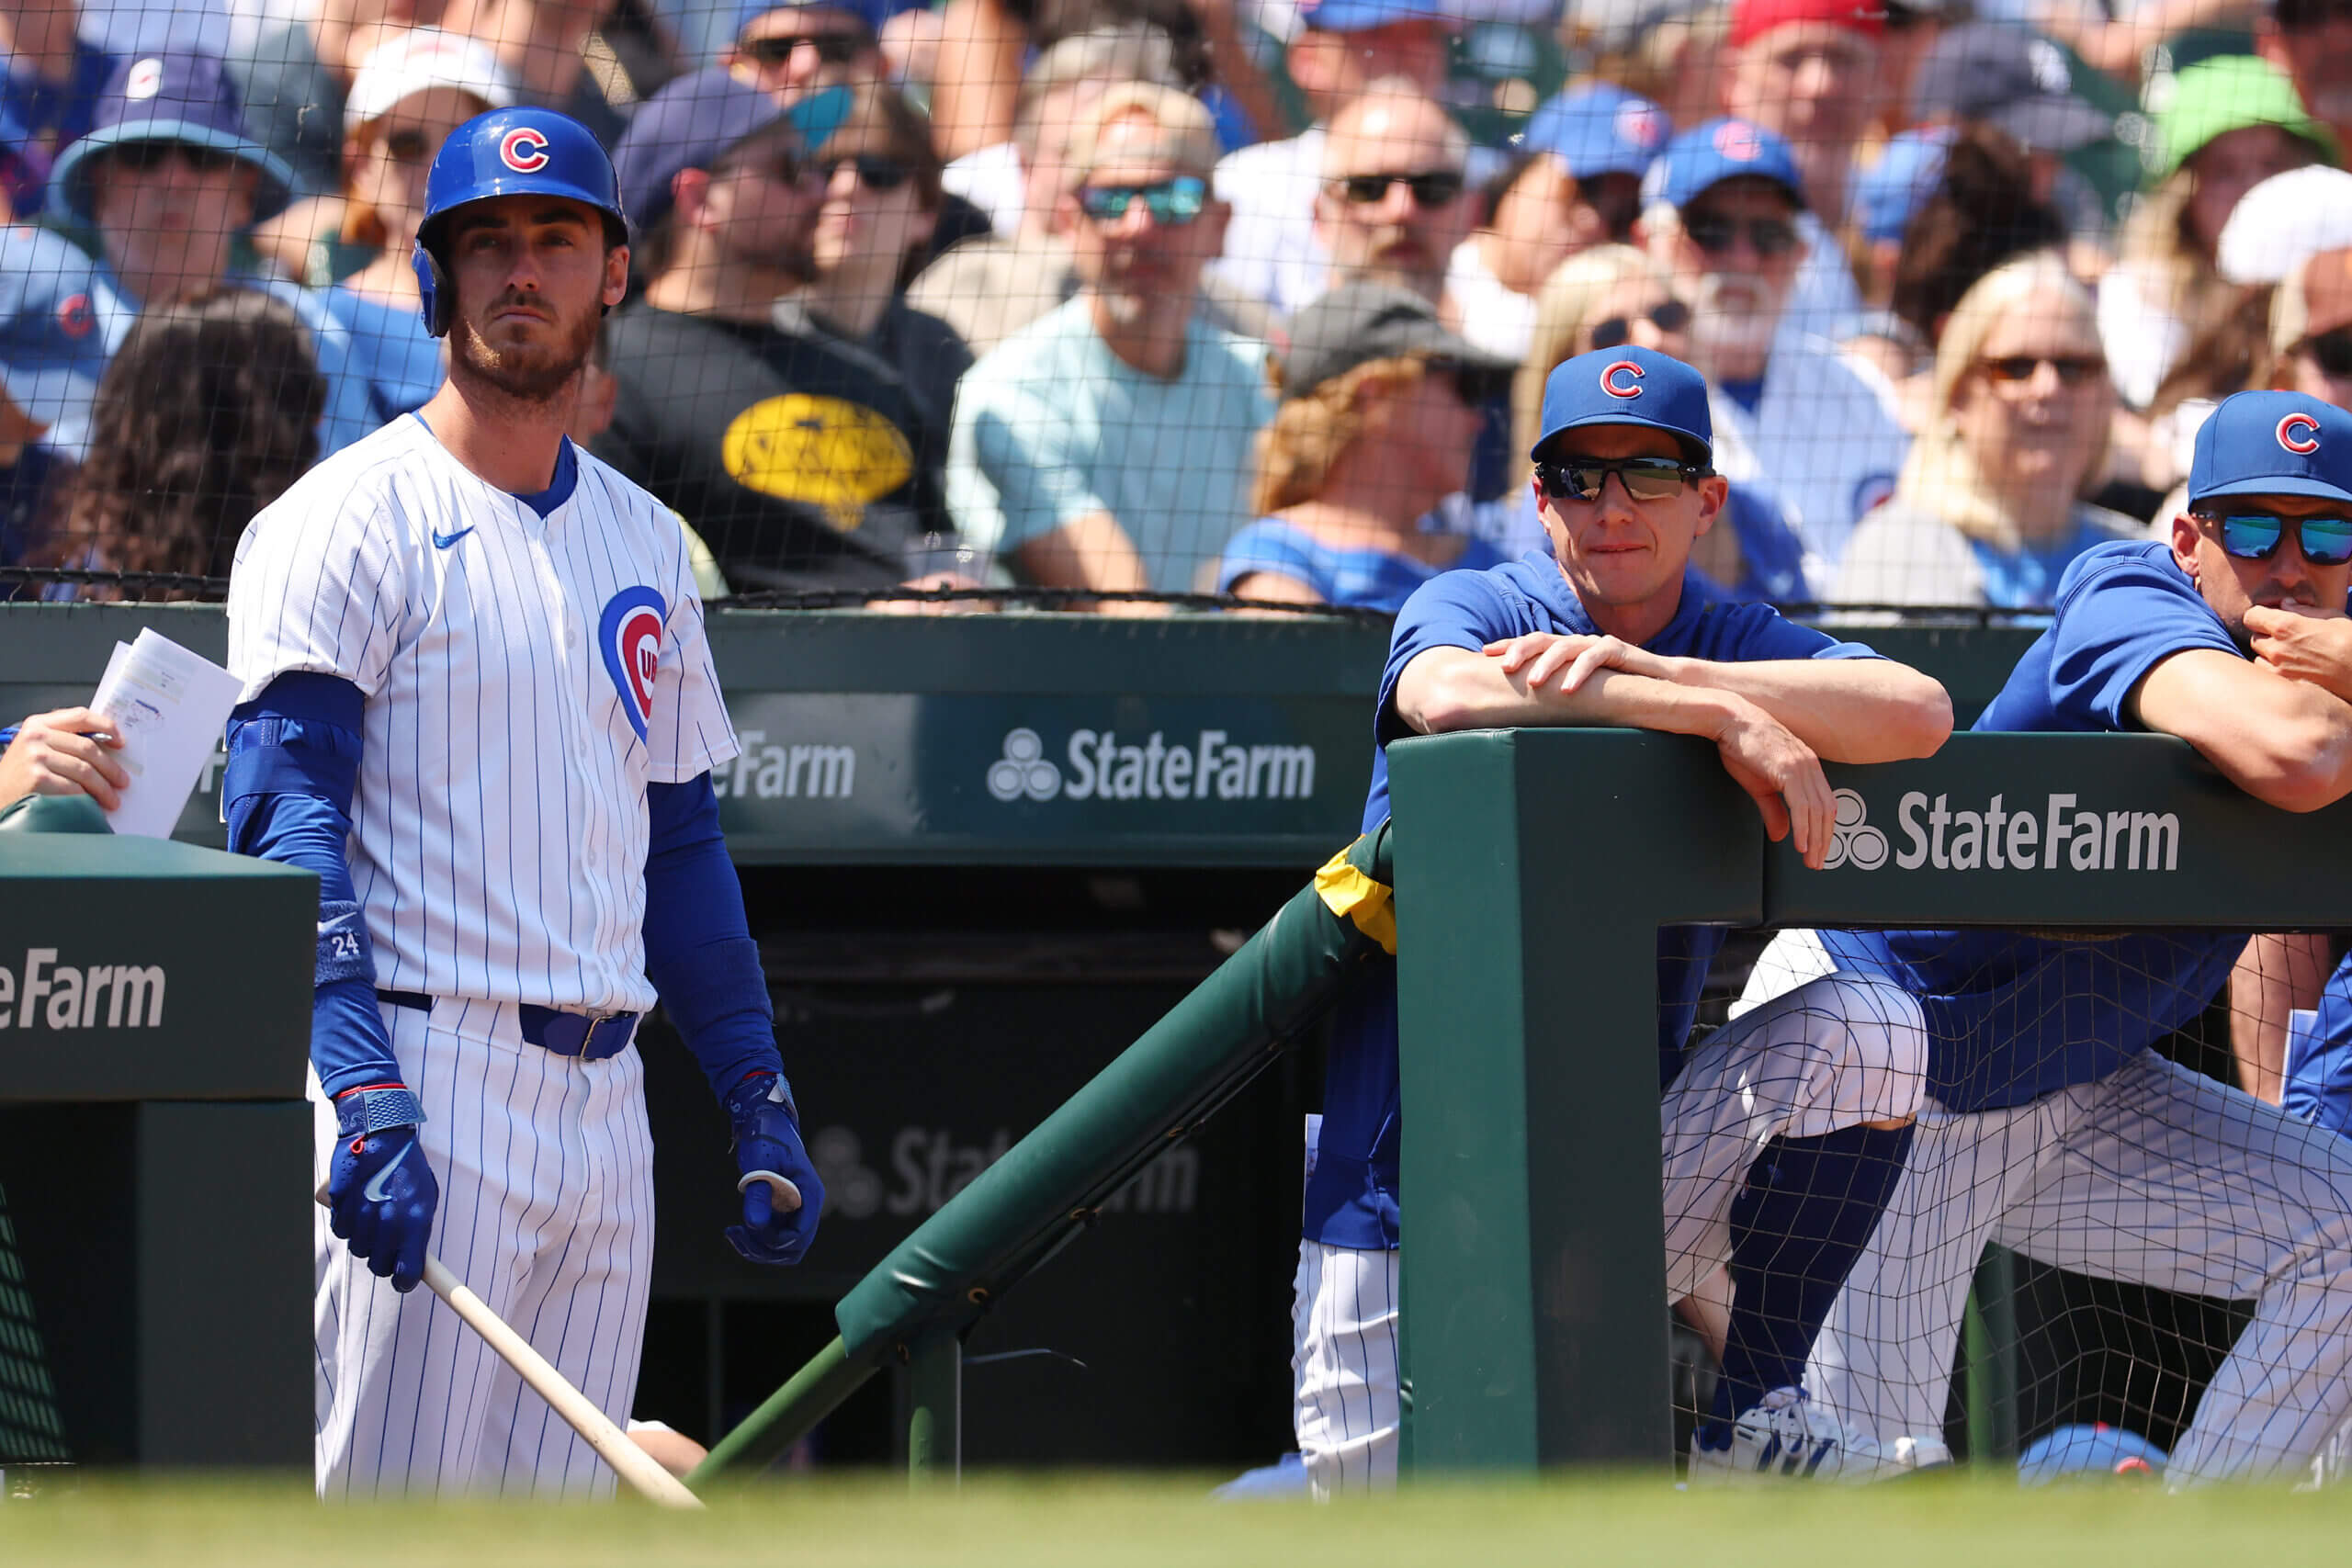 Cubs second-half storylines to watch, starting with the urgency to win before the trade deadline